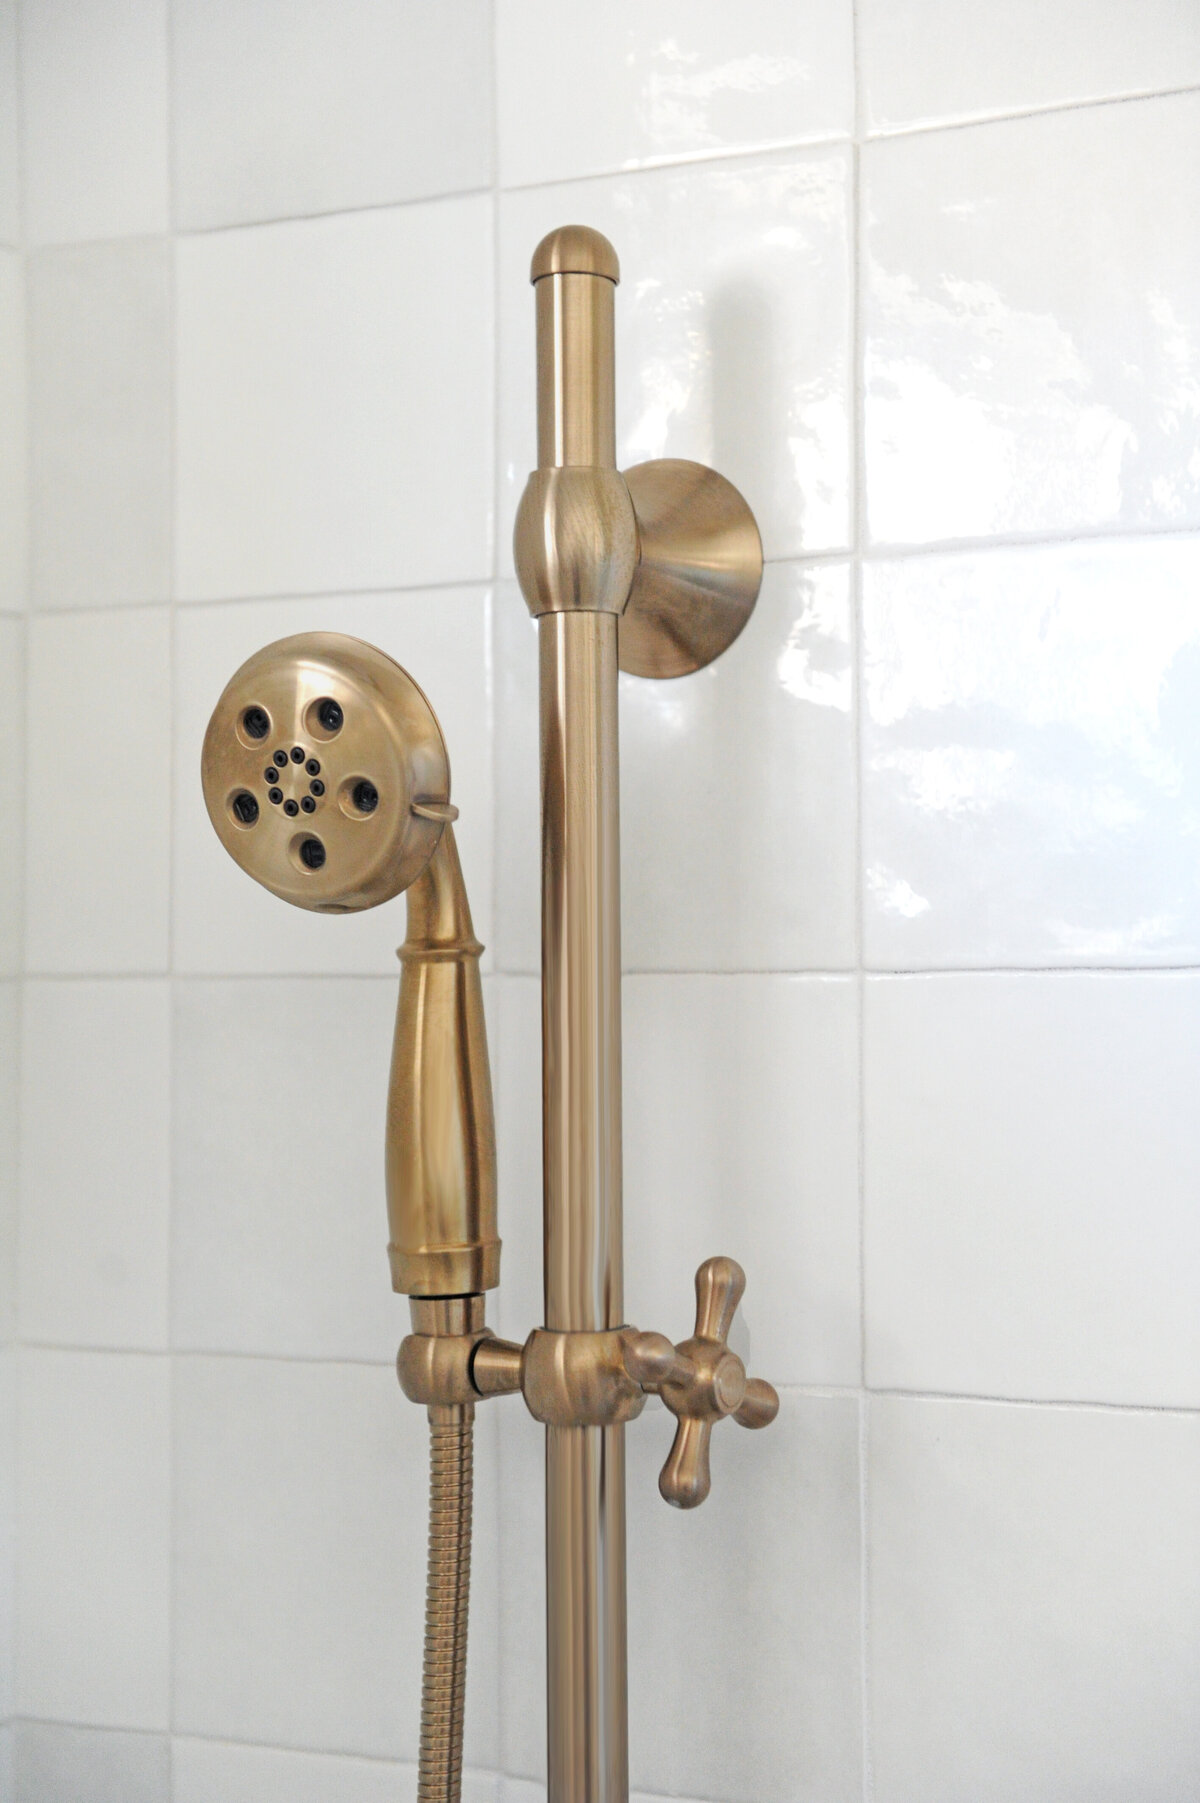 Brass  hand shower fixture mounted to tile shower wall